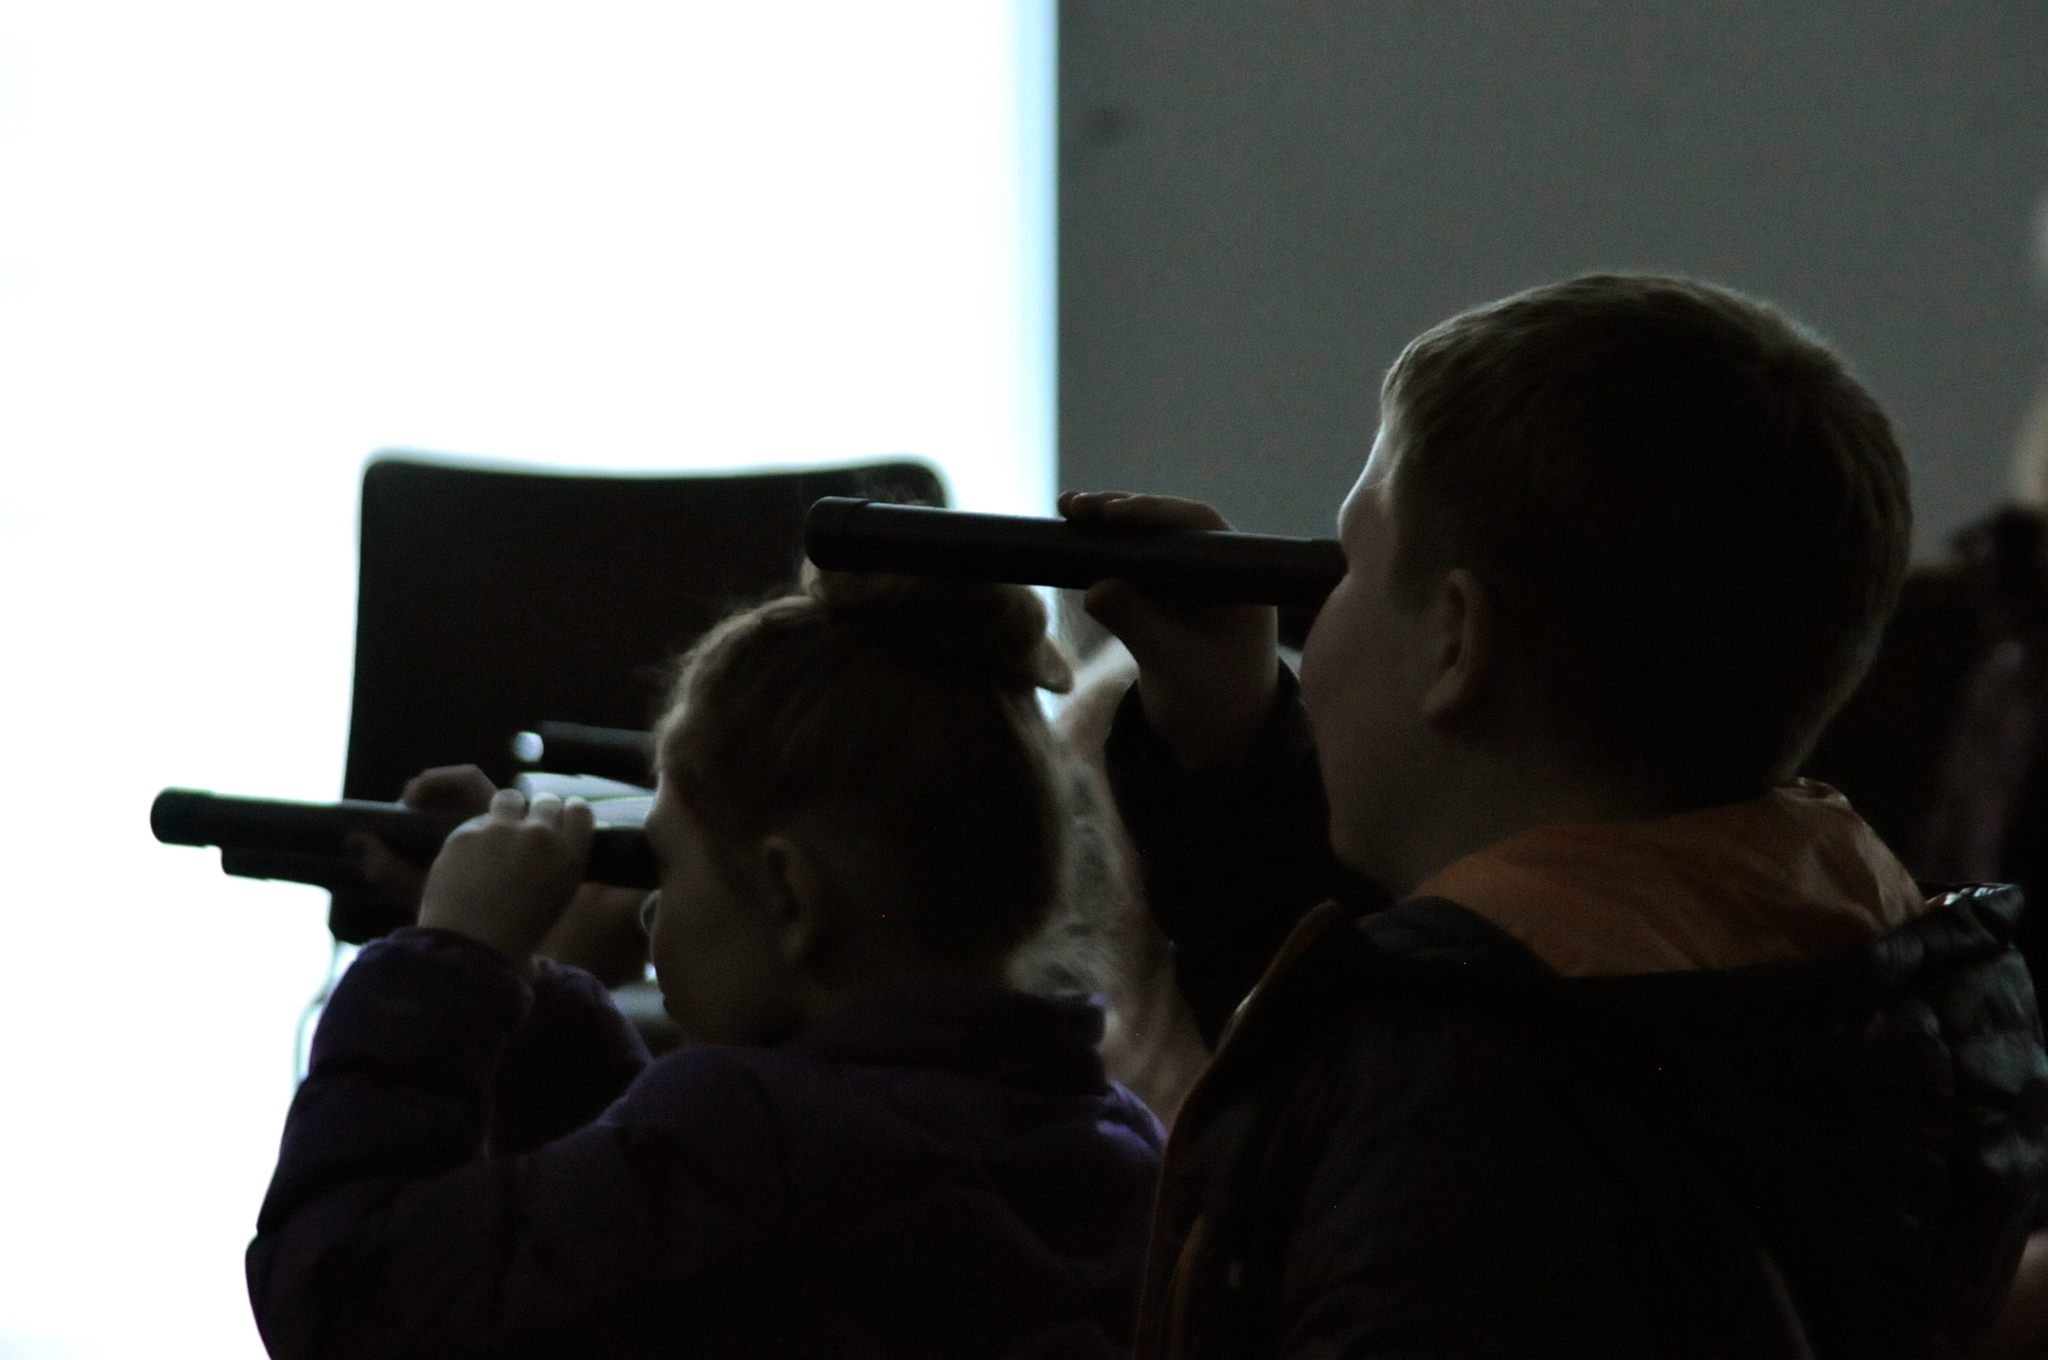 Kids learned the basics of visible and invisible light during a presentation from the Challenger Learning Center of Alaska on Monday, Jan. 16, 2017 at the Soldotna Public Library in Soldotna, Alaska. There wasn’t much sunlight, but the kids attending the event heard about the electromagnetic spectrum and learned how to use a spectrometer to see the types of light in the world around them. Summer Lazenby, the director of educational operations at the Challenger Learning Center, brought filters and spectrometers for the kids to see firsthand how light moves and is split into its different components of color.